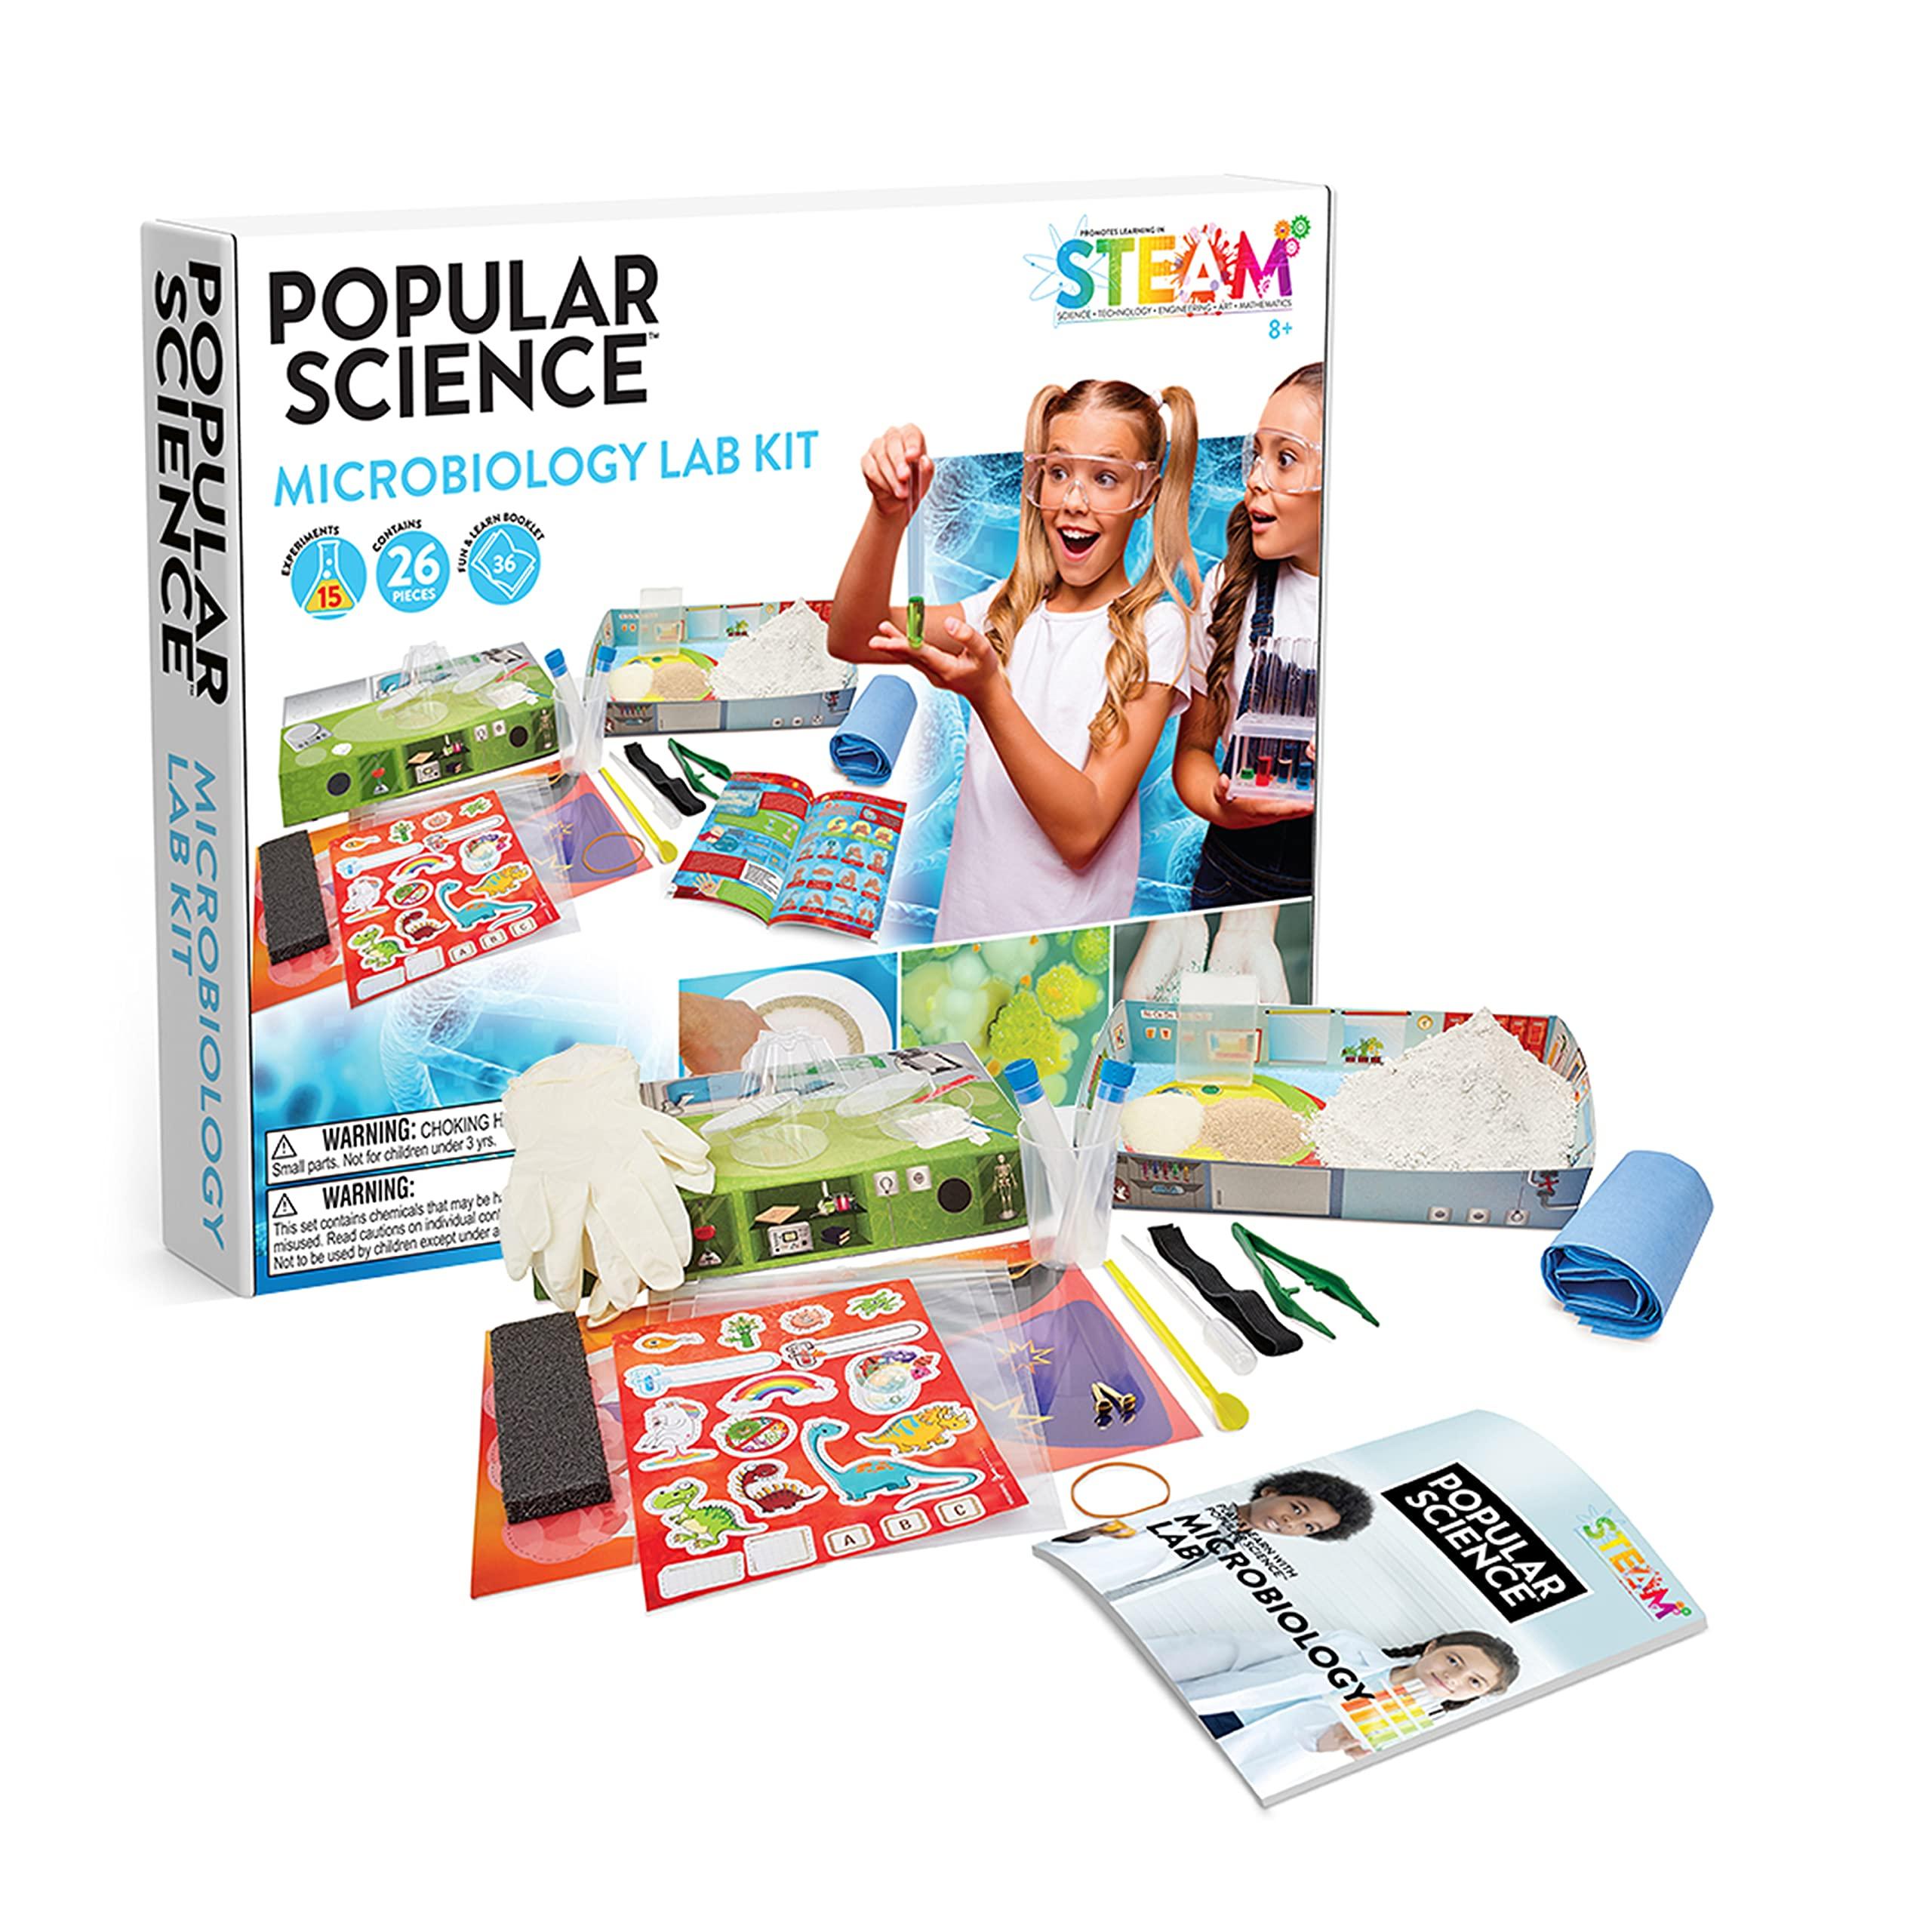 POPULAR SCIENCE Microbiology Lab Science Kit | STEM Science Toys and Gifts for Educational and Fun Experiments | Designed for Children Aged 5 to 12 Years Old and Suitable for All The Family